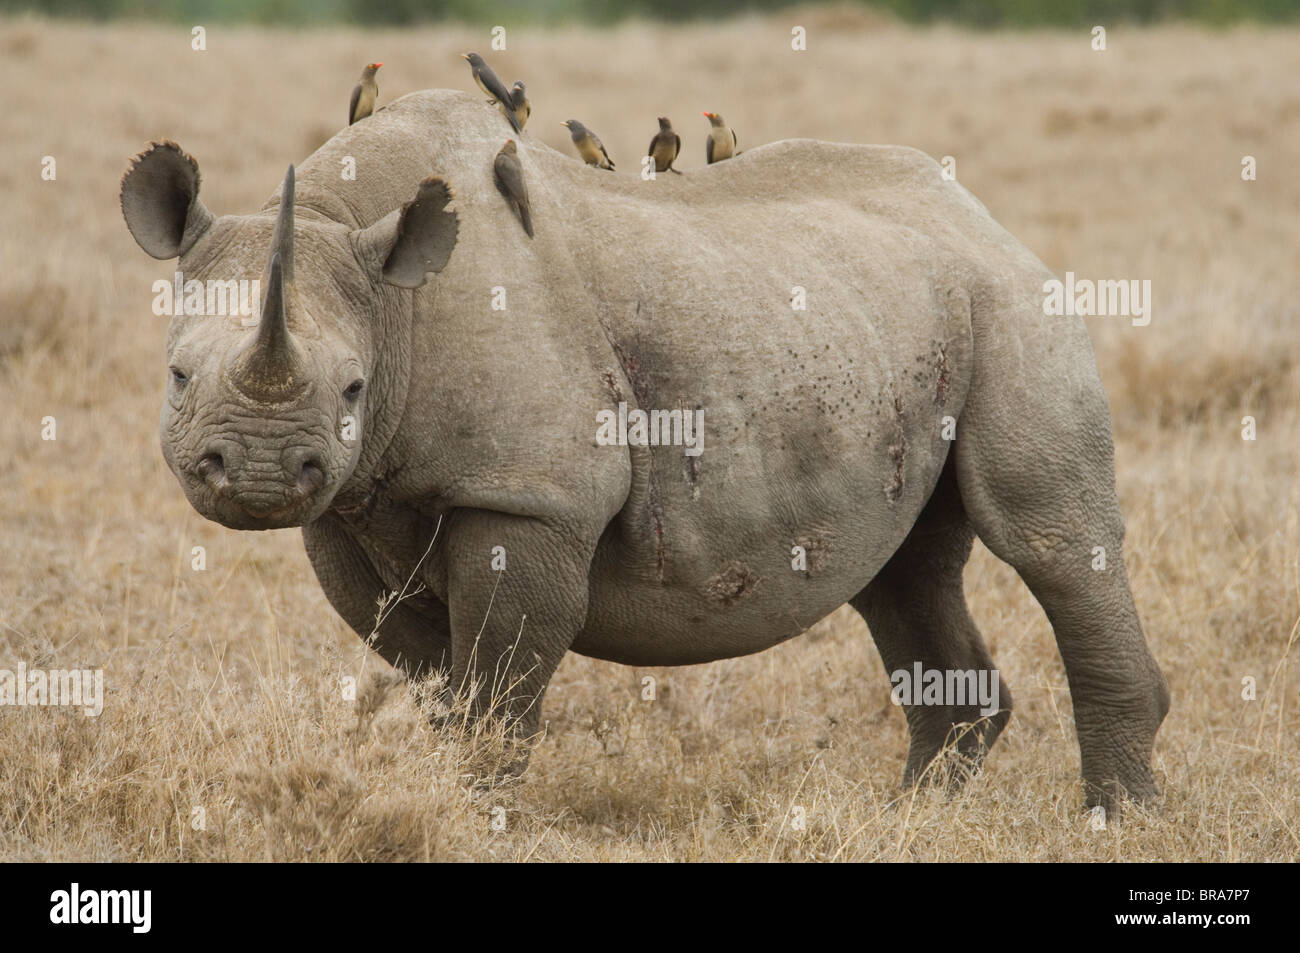 WHITE RHINO LOOKING AT CAMERA OXPECKER TICKBIRDS SUR SON DOS L'AFRIQUE TANZANIE Banque D'Images